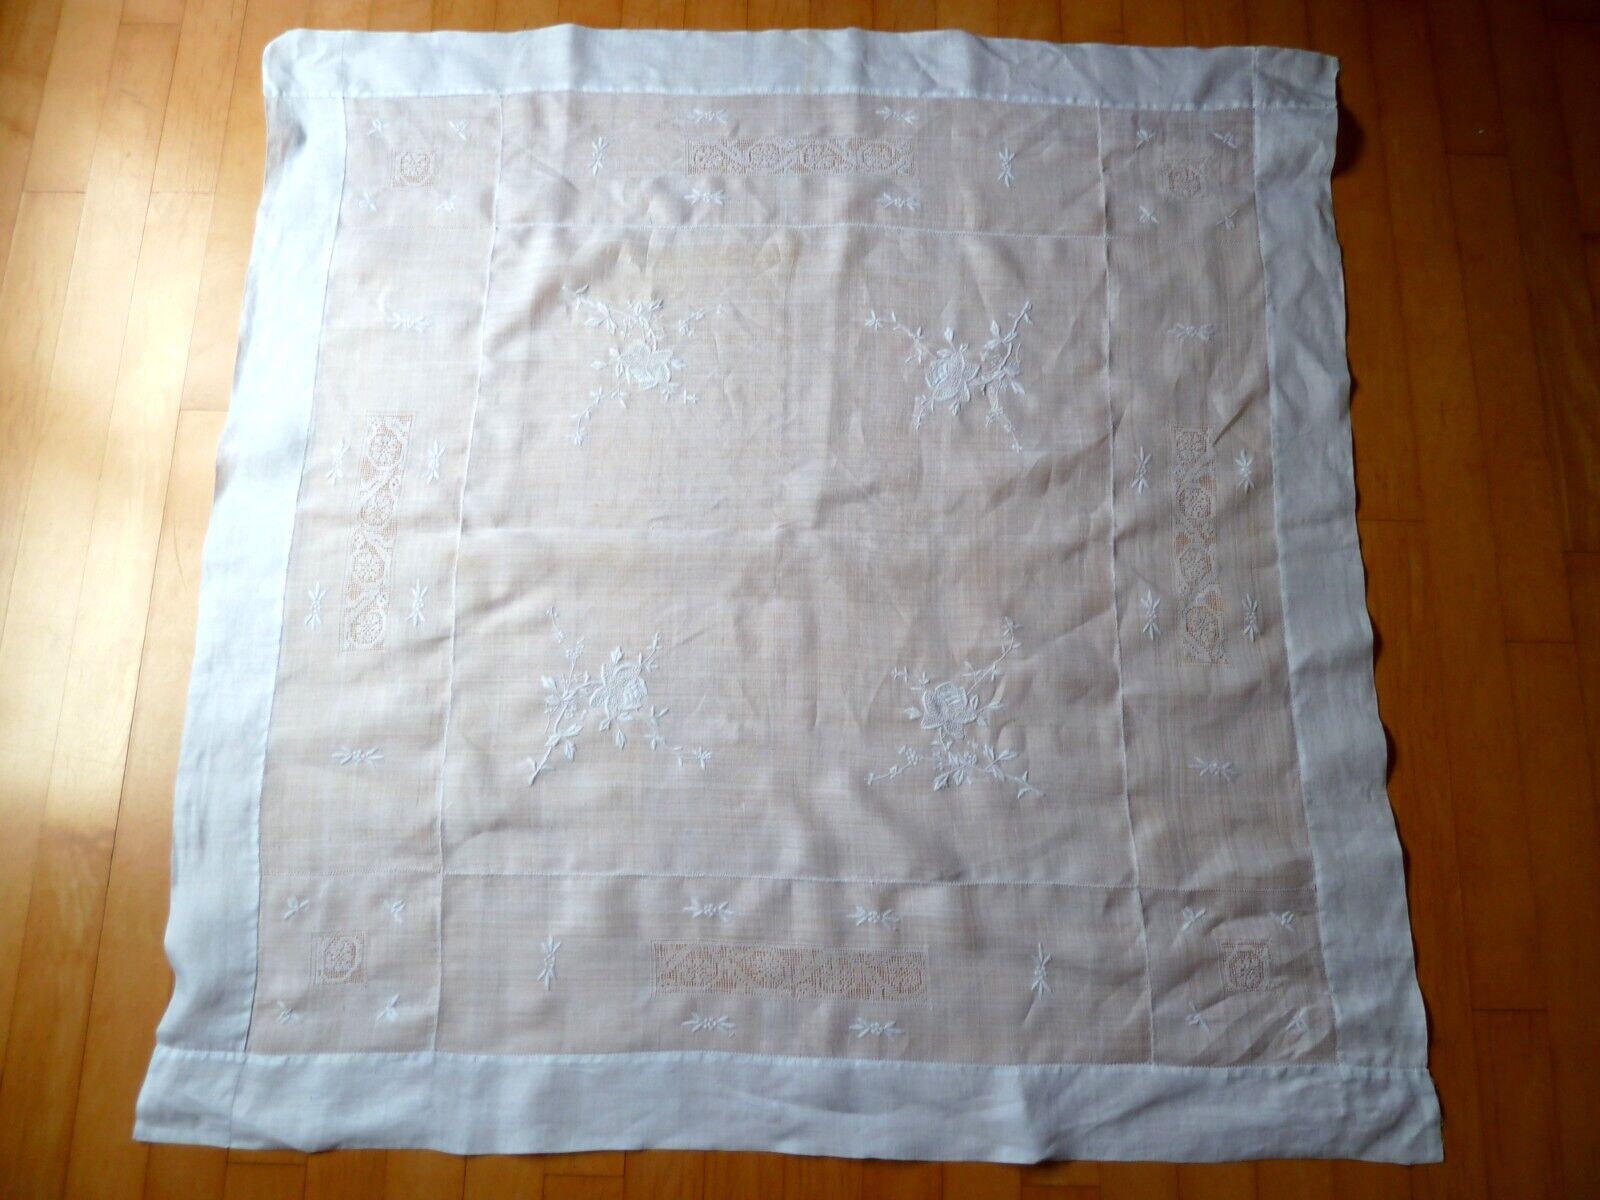 VTG Handmade Embroidered White Linen Tablecloth 51 inch Square with Lace Details